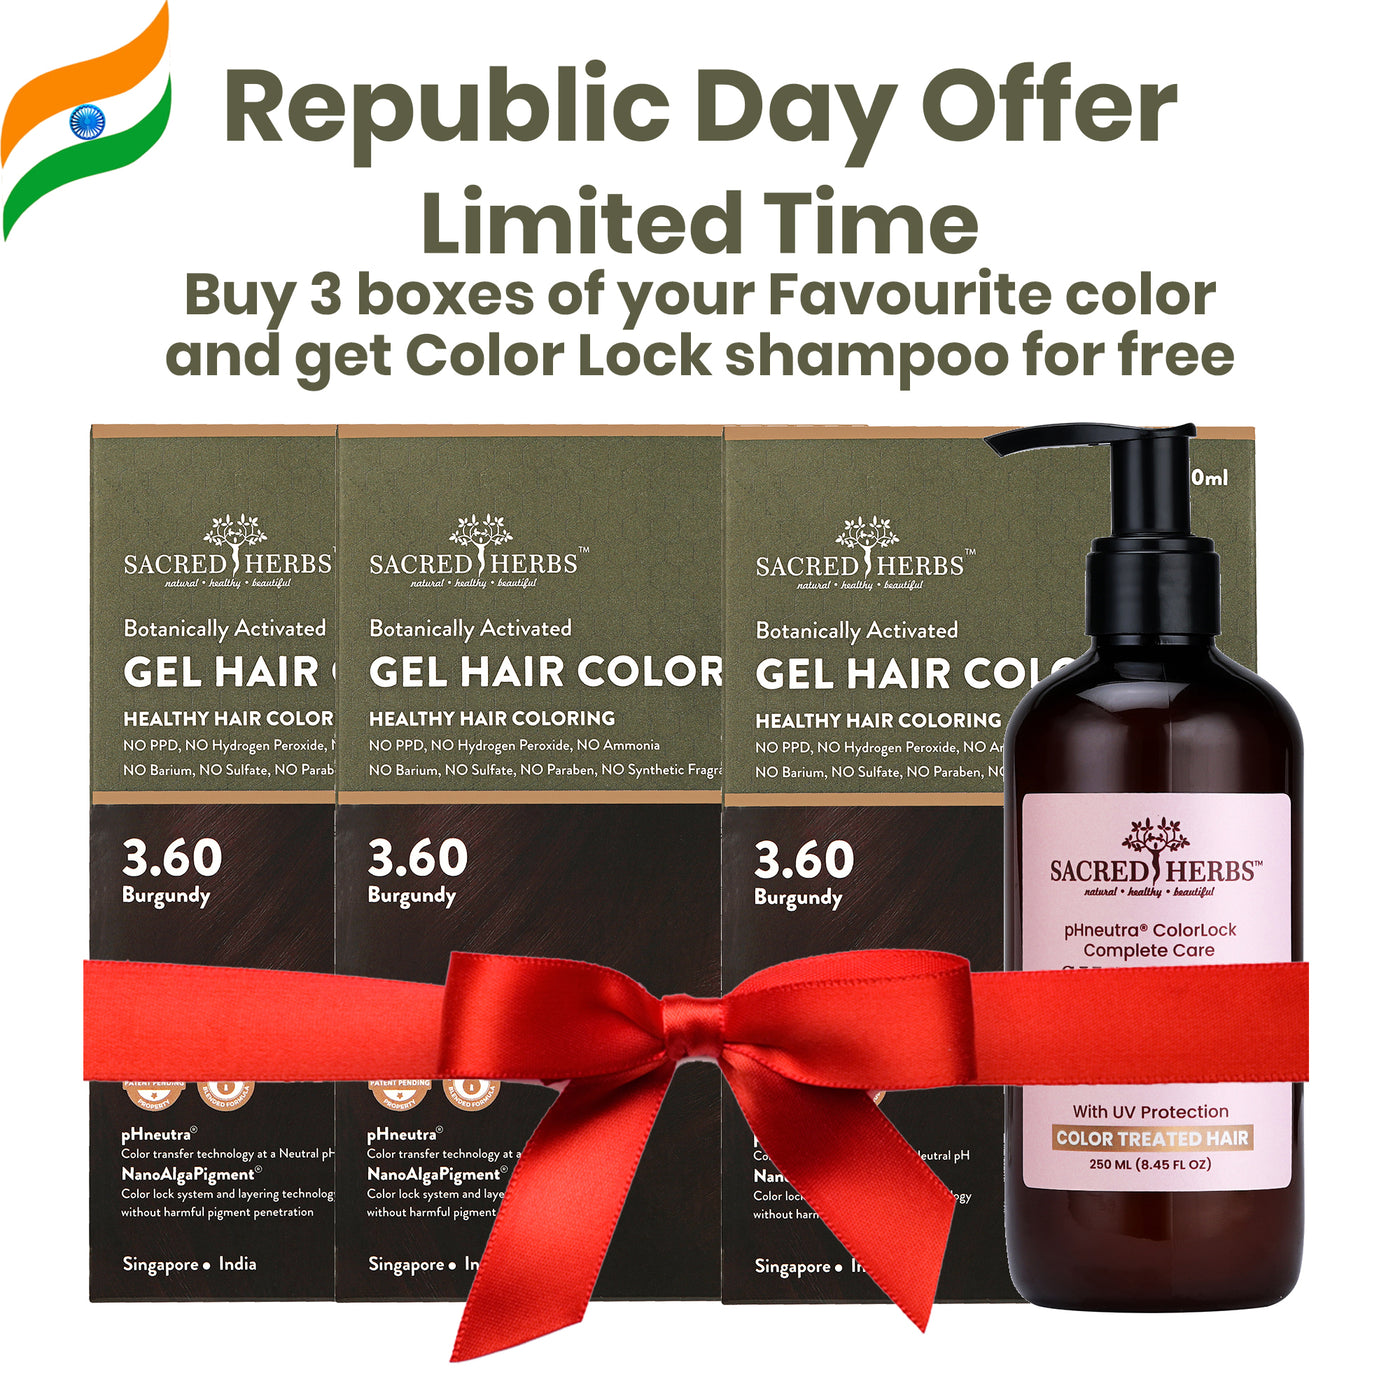 Super Combo Burgundy 3.60 SacredHerbs Botanically Activated Gel Hair Color